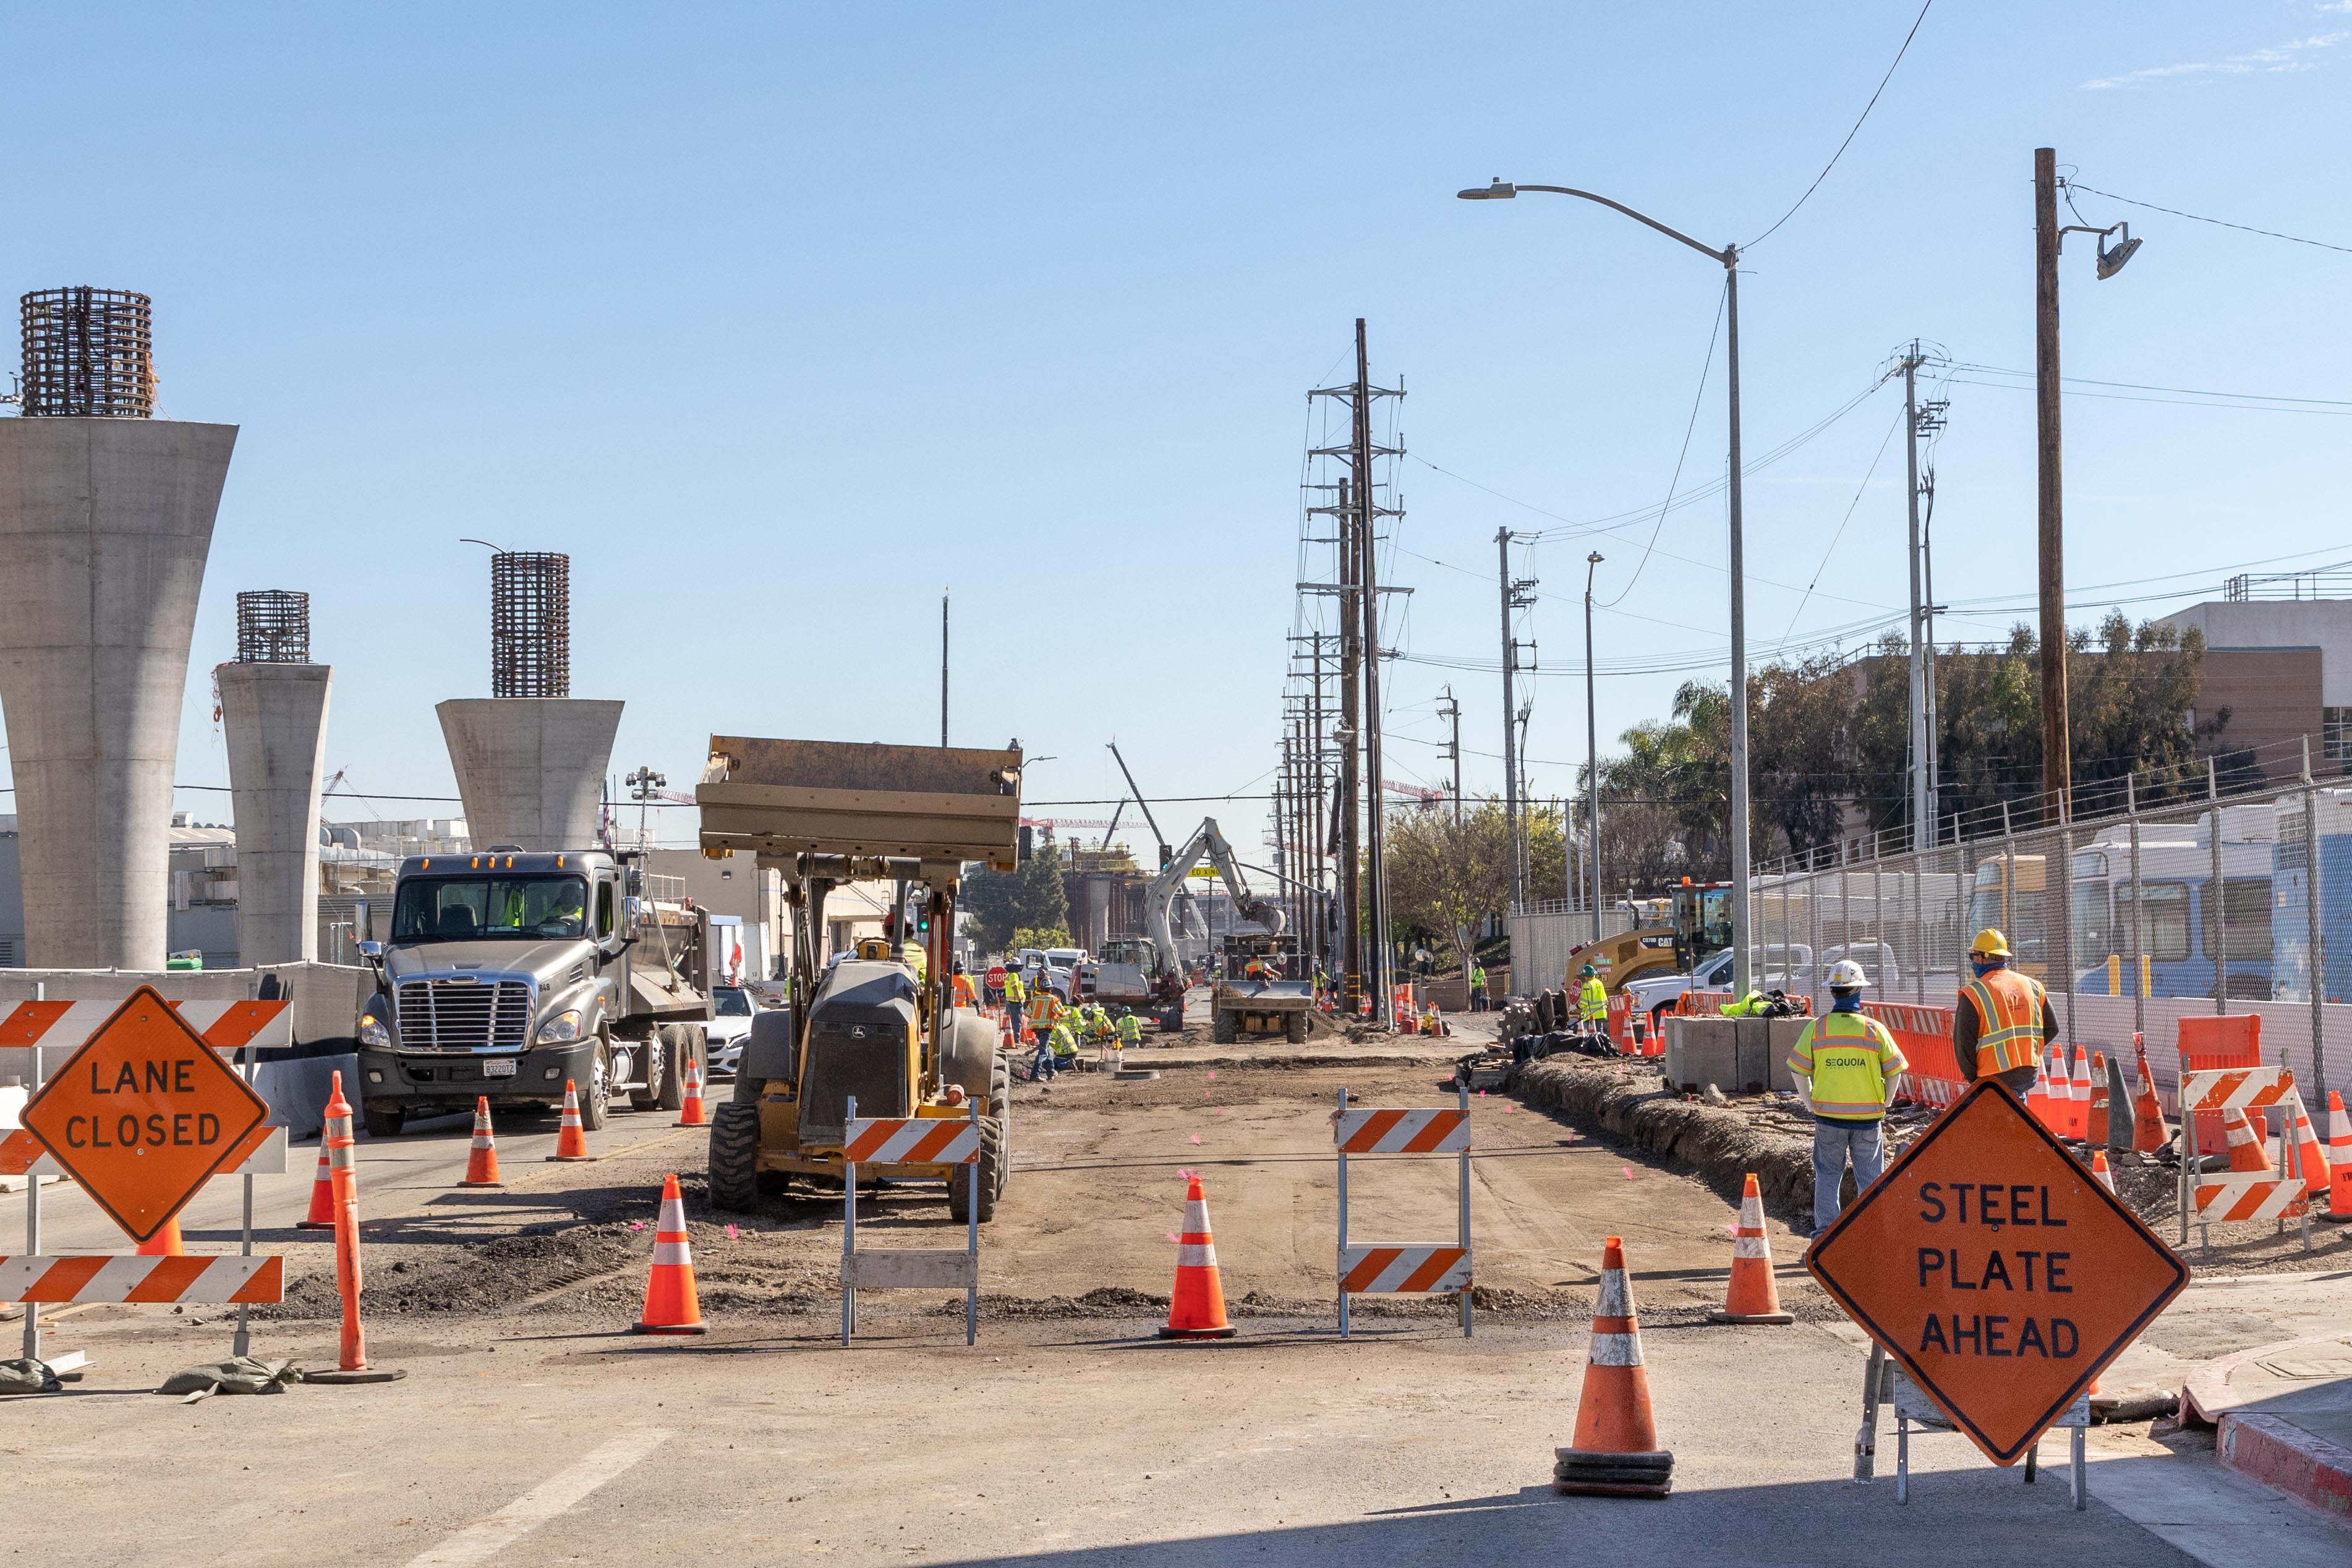 Outside the system's future Maintenance and Storage Facility, crews work to expand the roadway to ease traffic impacts related to the Automated People Mover train guideway construction.